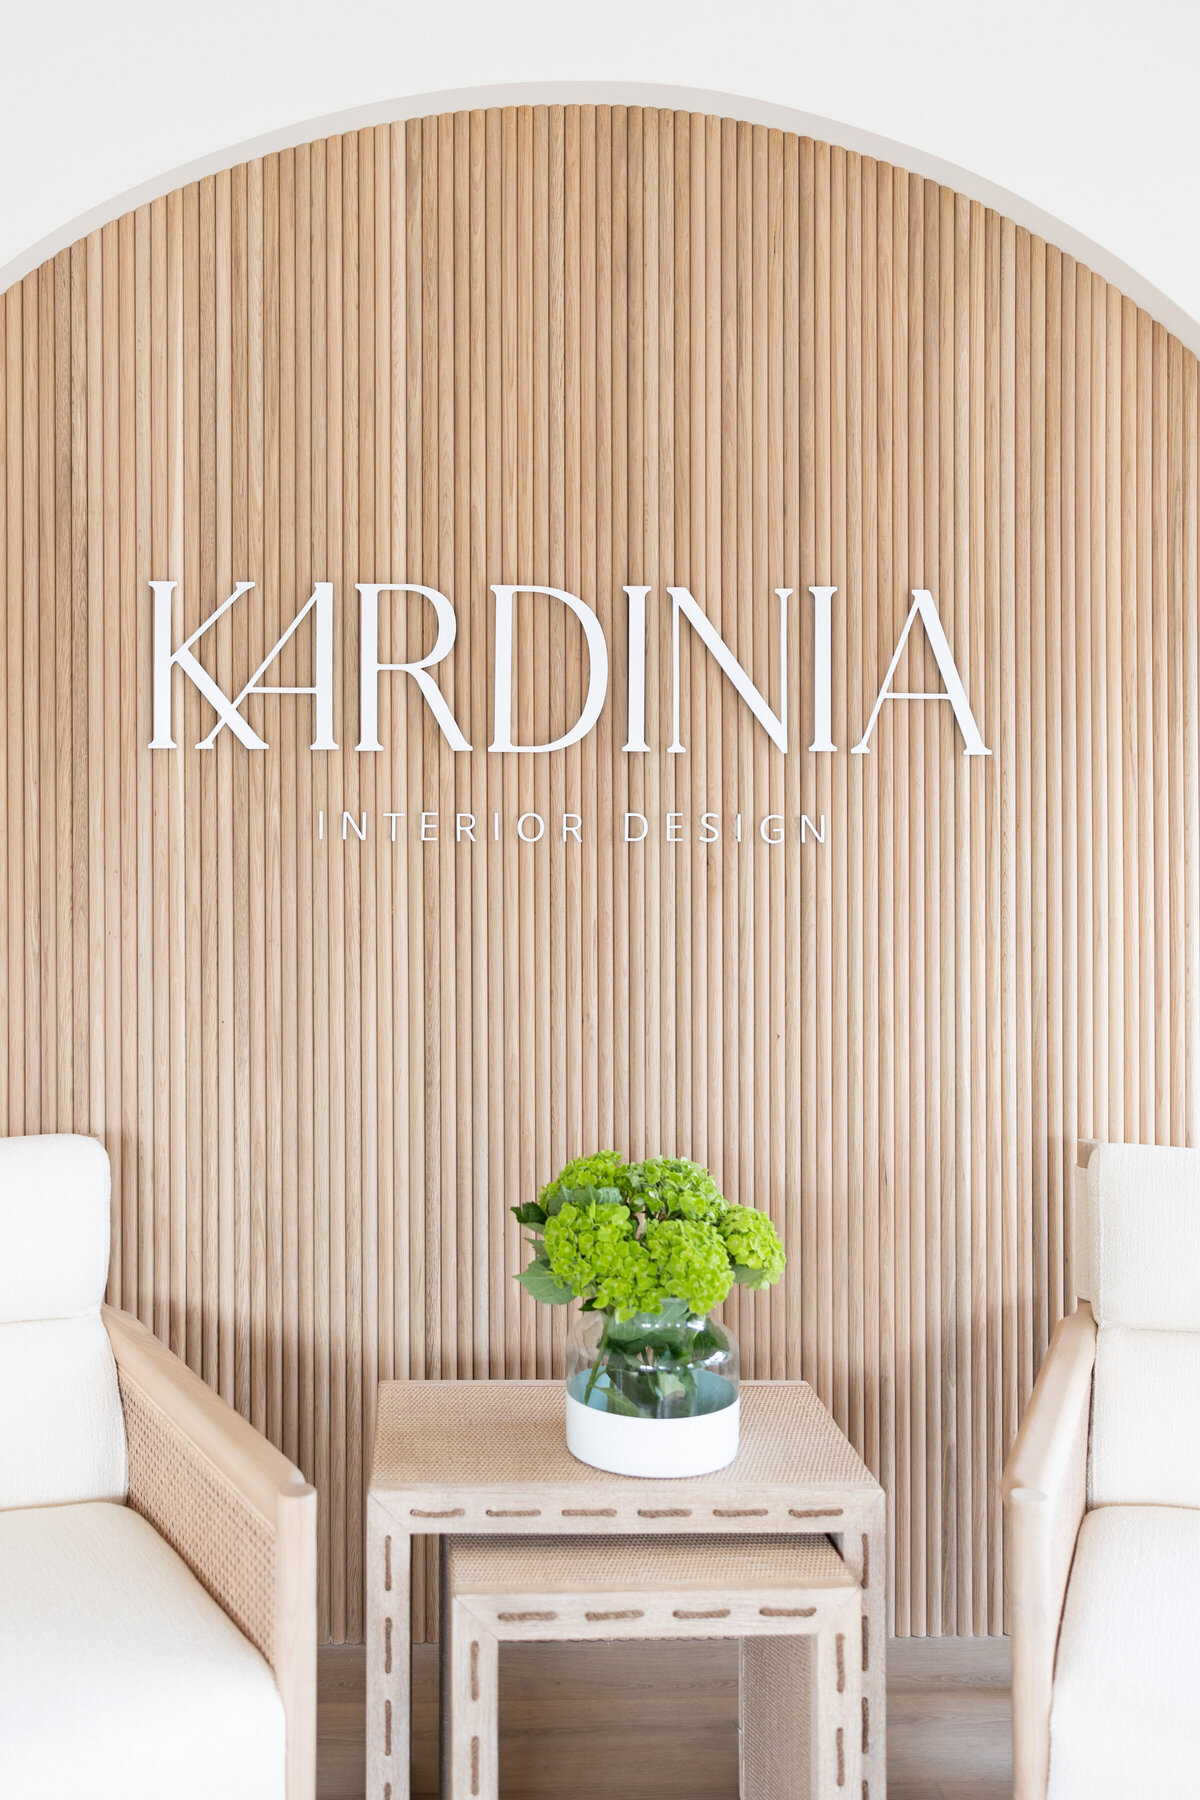 Kardinia Office| Images By Orlando Brand photographer by The Branded Boss Lady 80